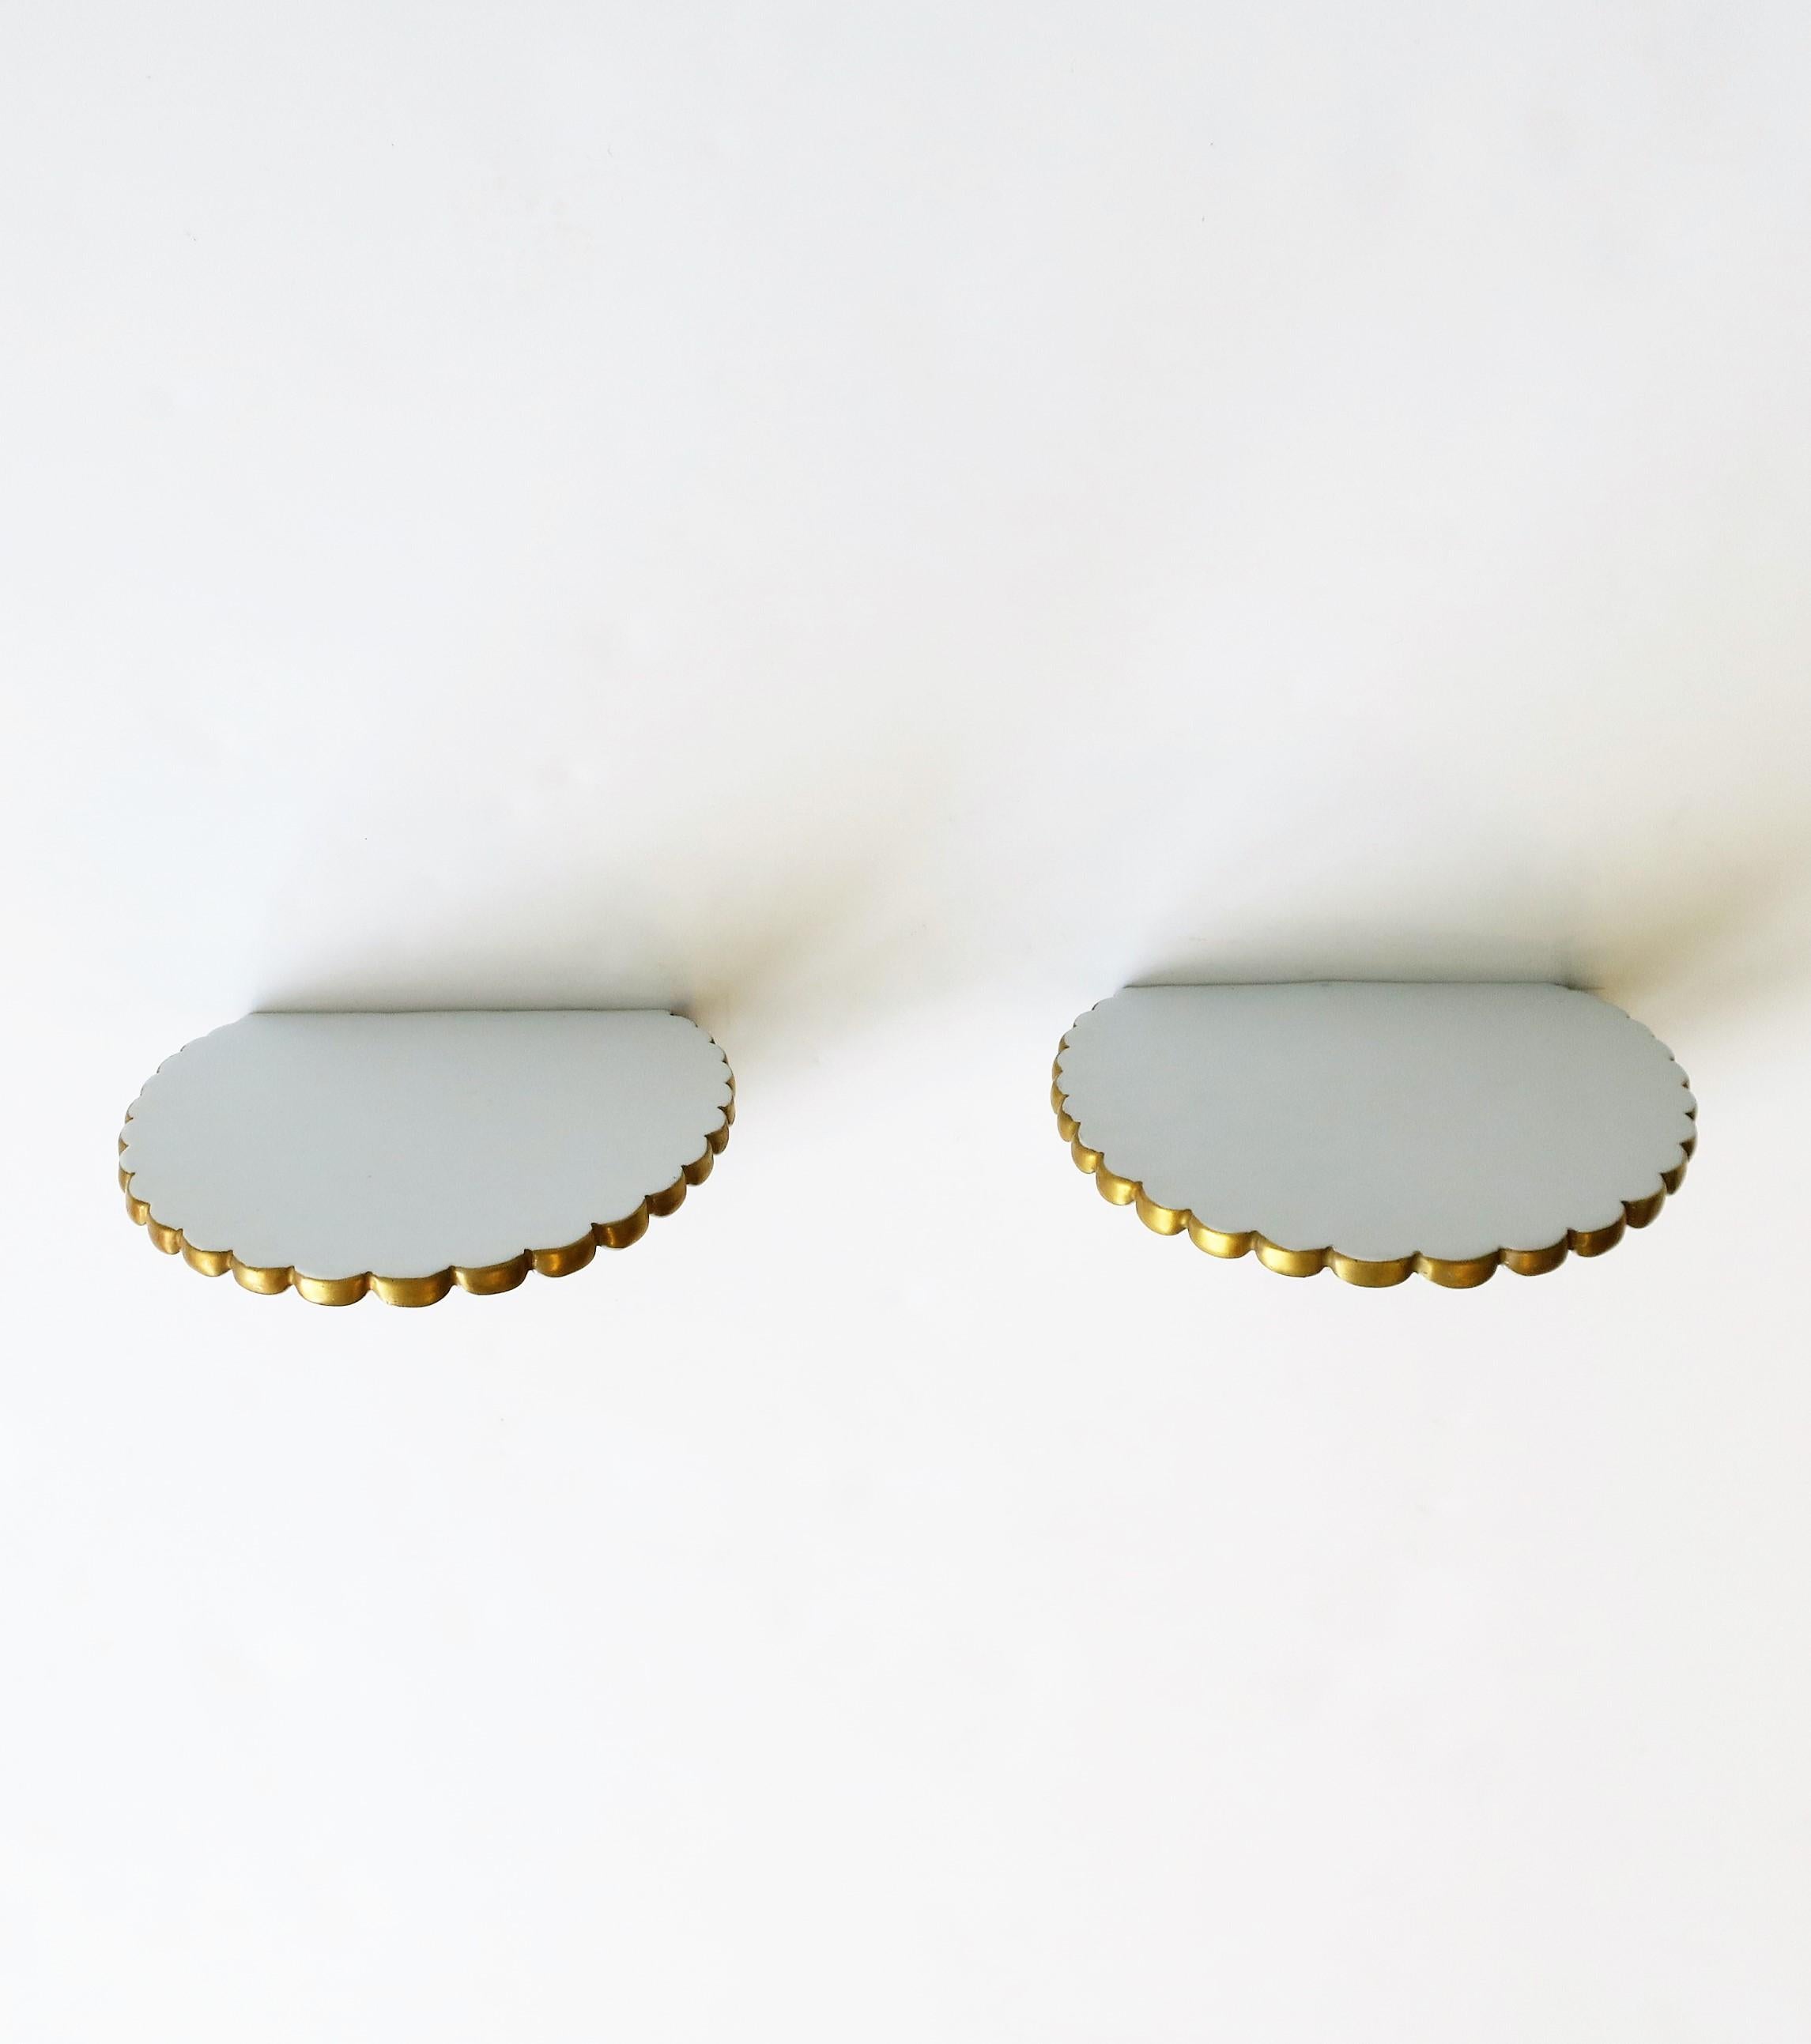 Regency Wall Shelves or Brackets White and Gold with Scallop Seashell Design